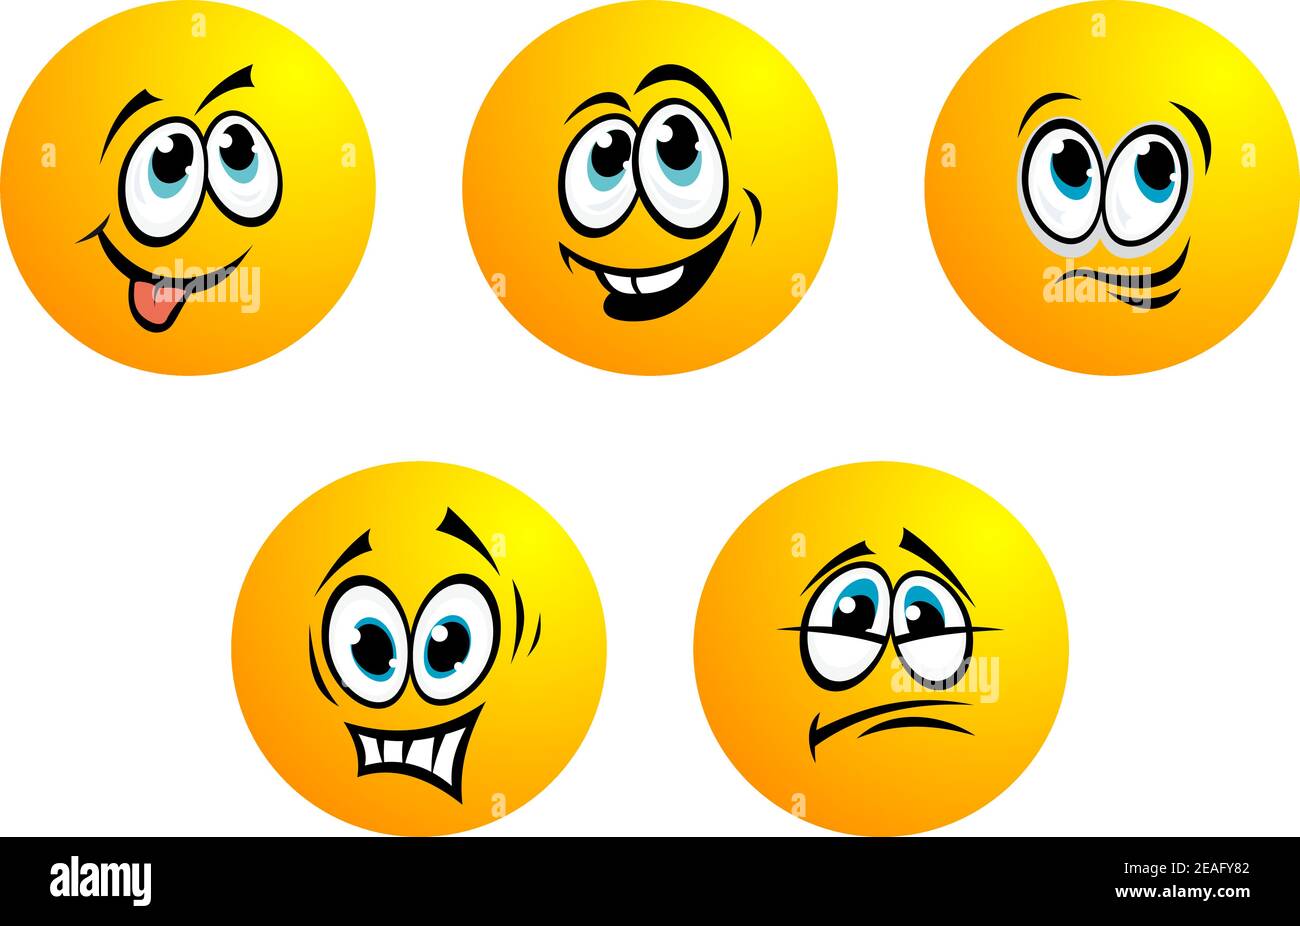 Five cute yellow round vector emoticons with blue eyes showing a range of expressions including fear, disappointment, bashful, smiling and toothy laug Stock Vector